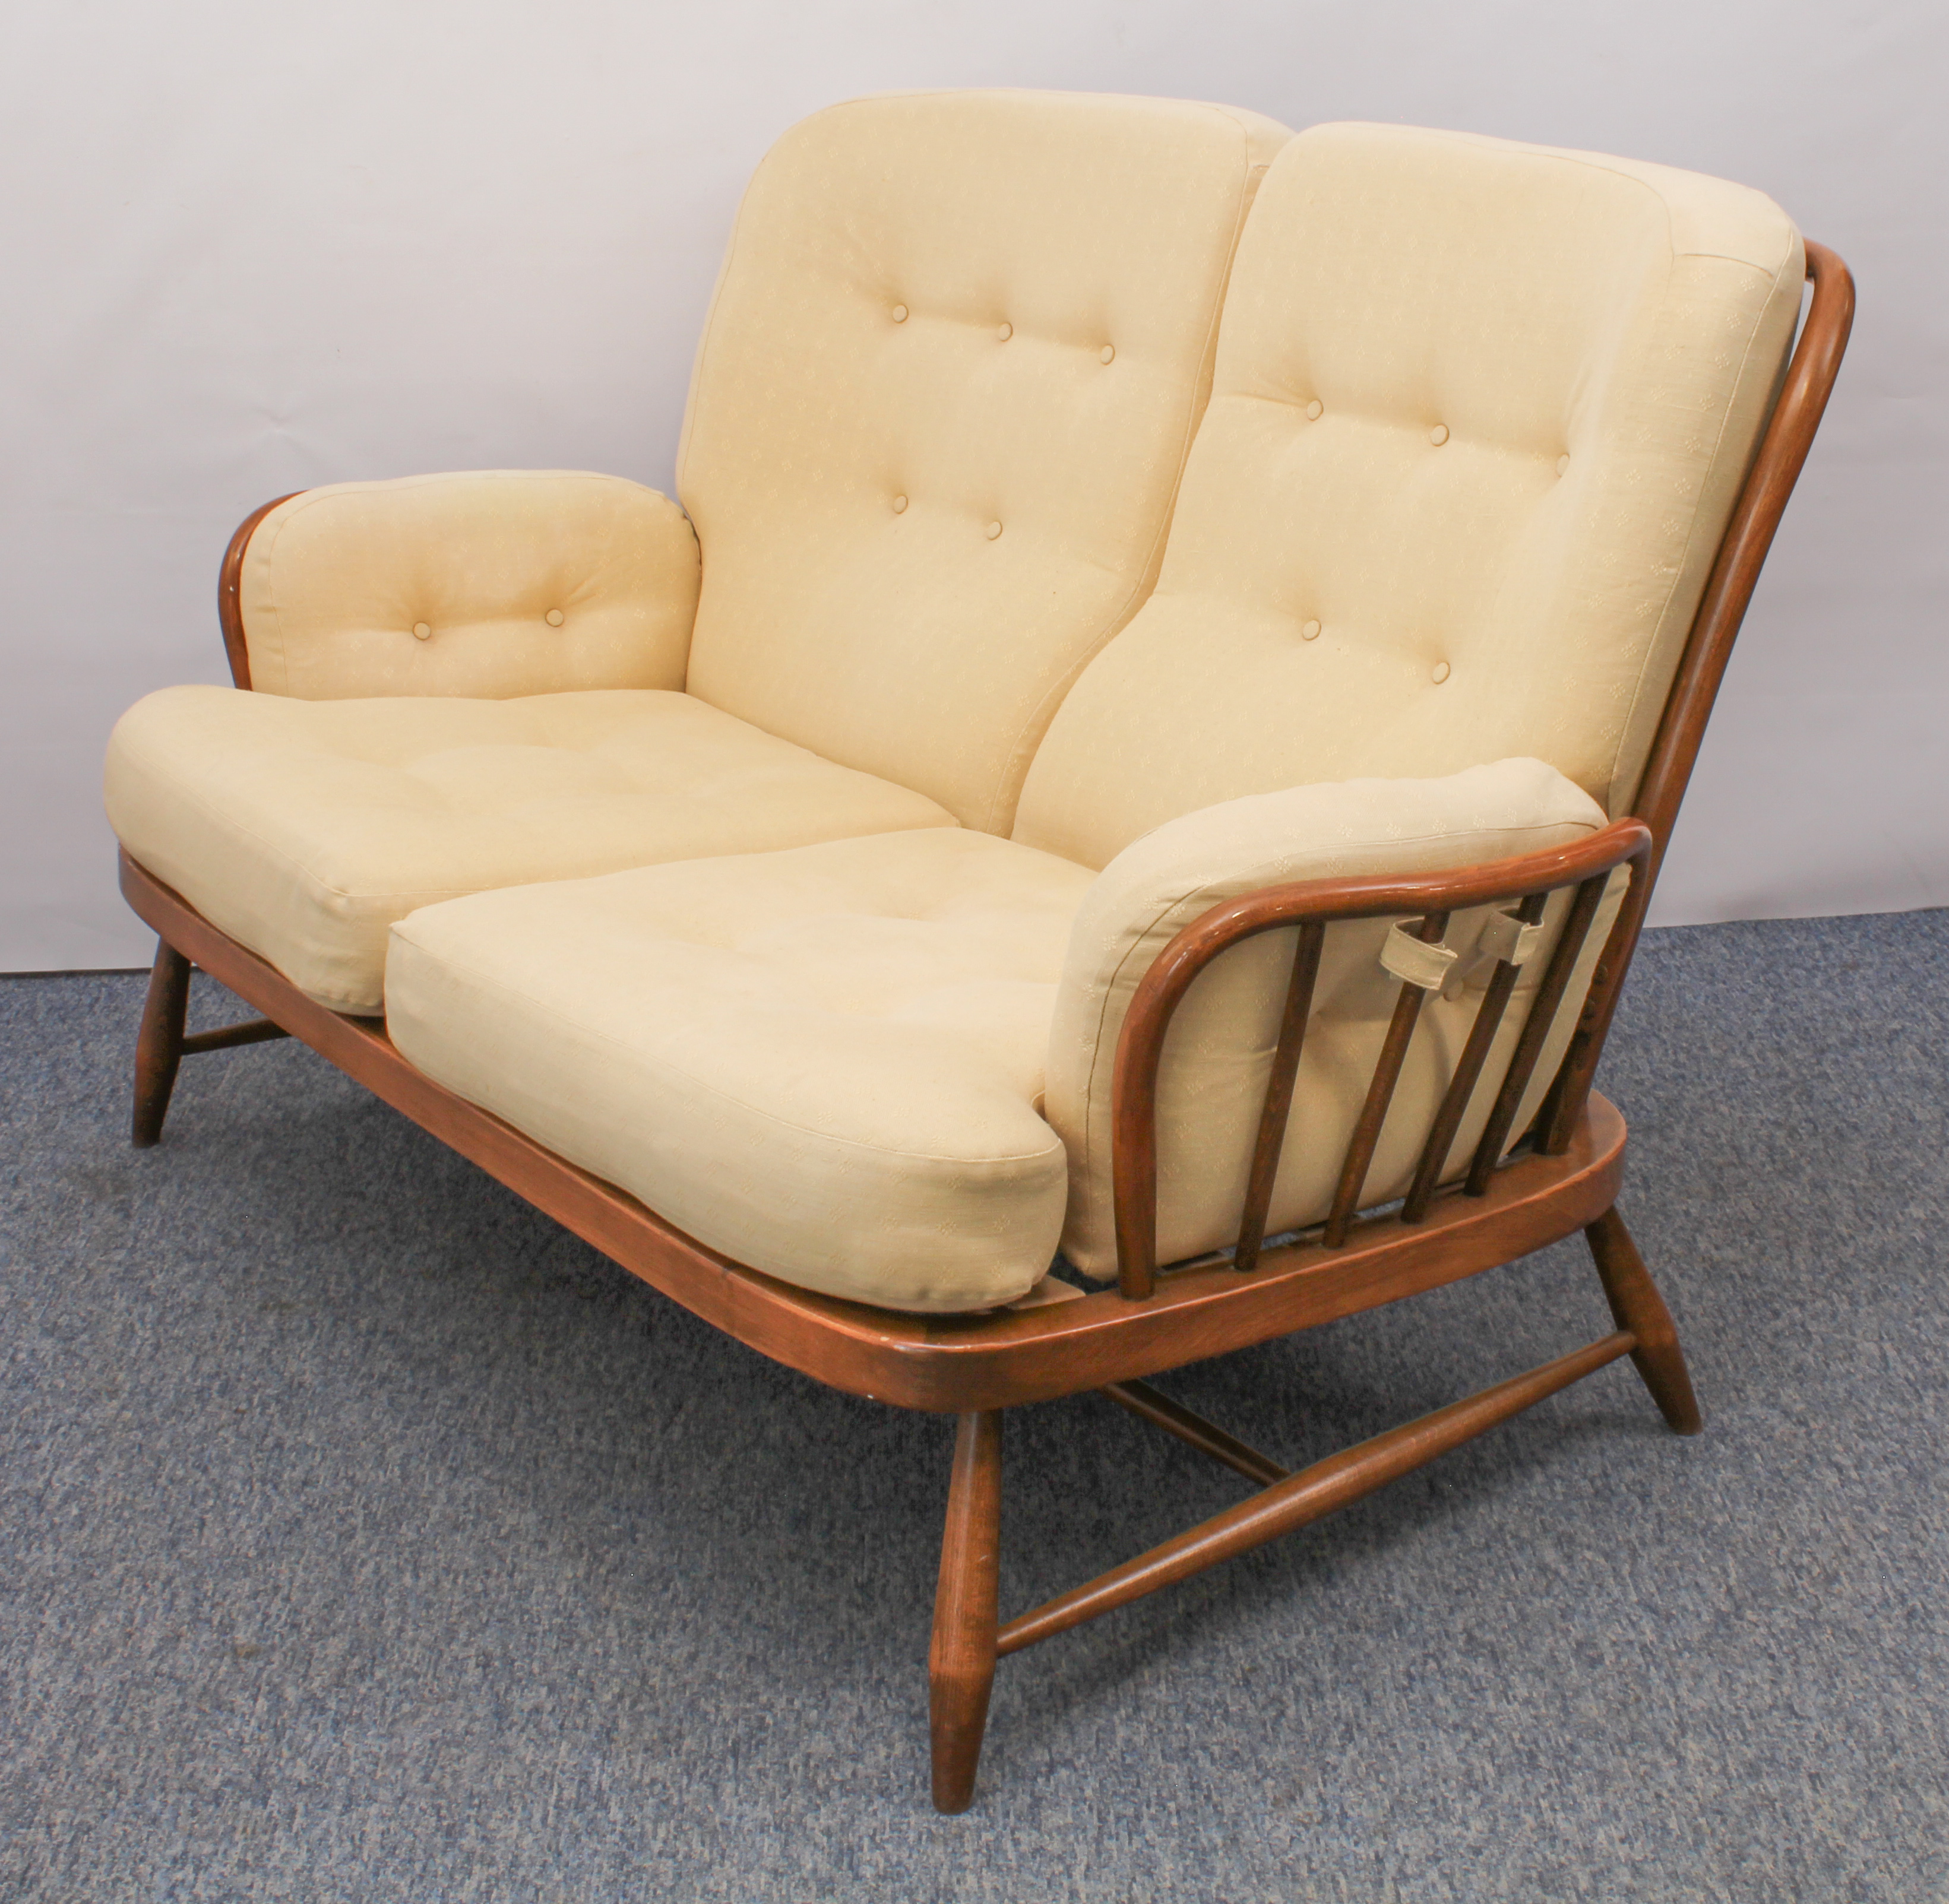 An Ercol Windsor beech and elm two-seater sofa - Jubilee model, no.766, with original pale gold - Image 2 of 4